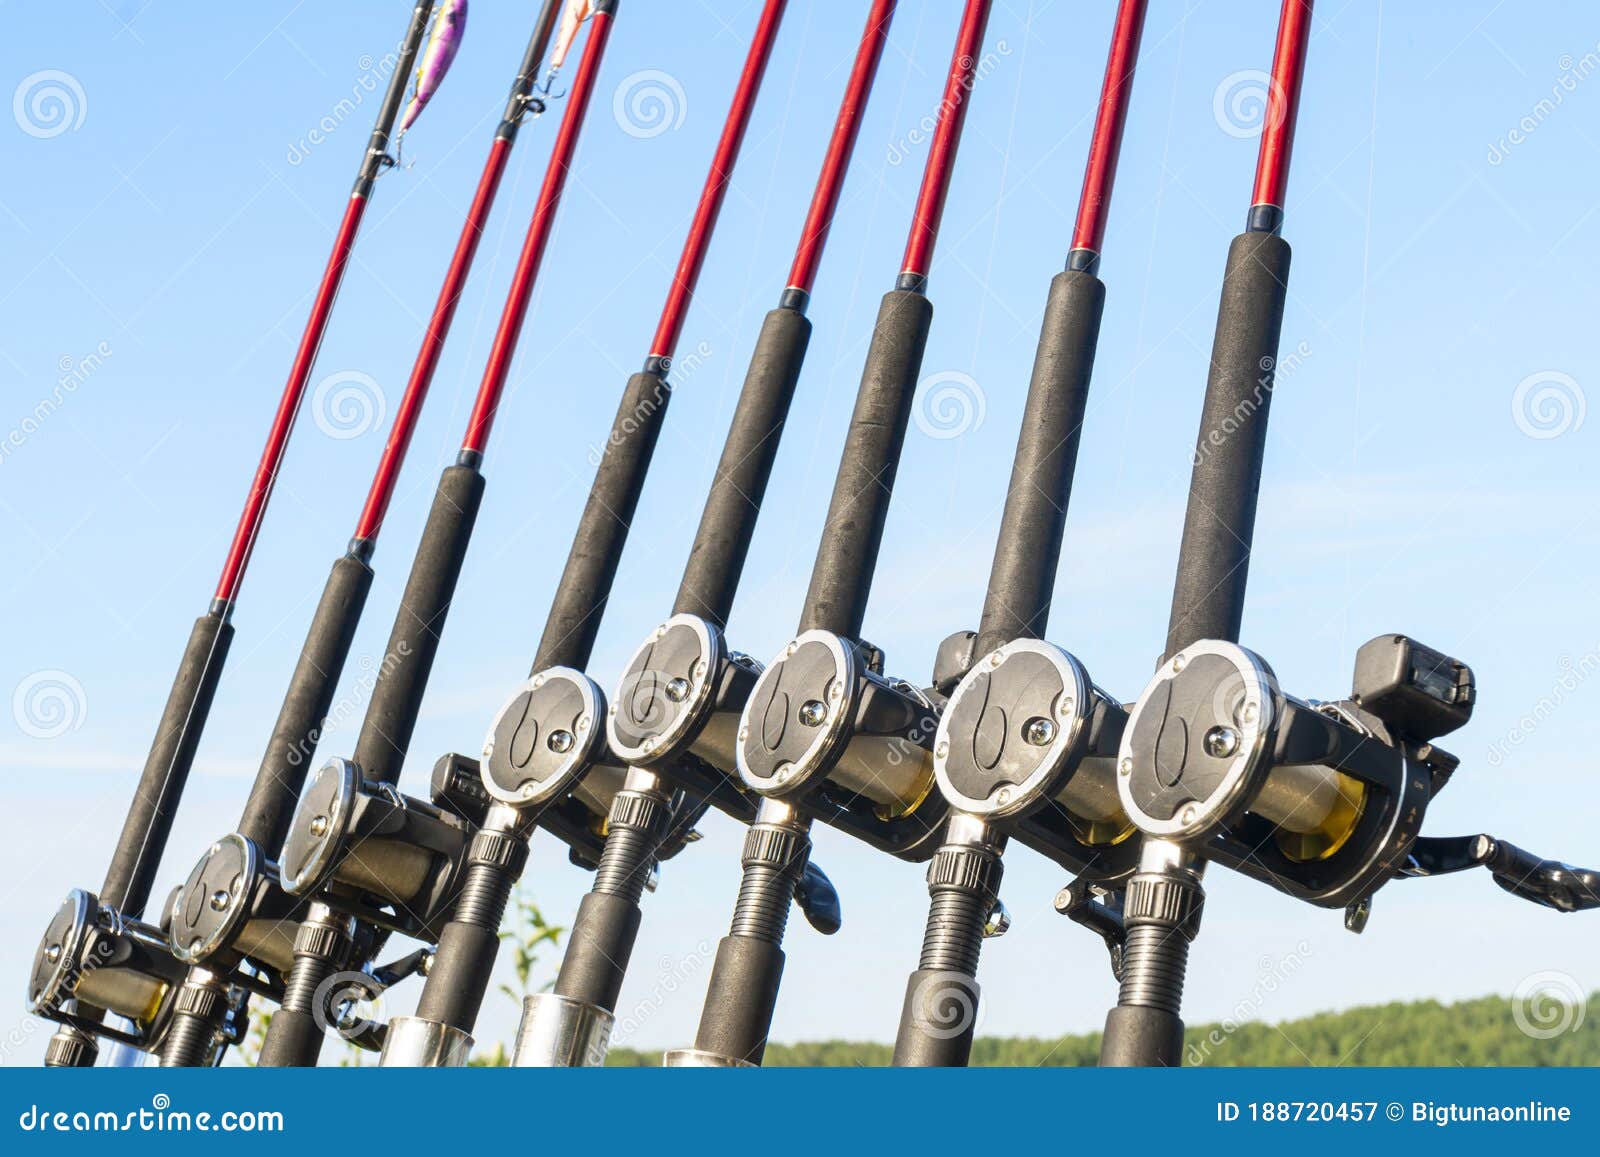 Fishing Trolling Boat Rods in Rod Holder. Big Game Fishing. Fishing Reels  and Rods Pattern on Boat Stock Image - Image of recreation, outdoors:  188720457